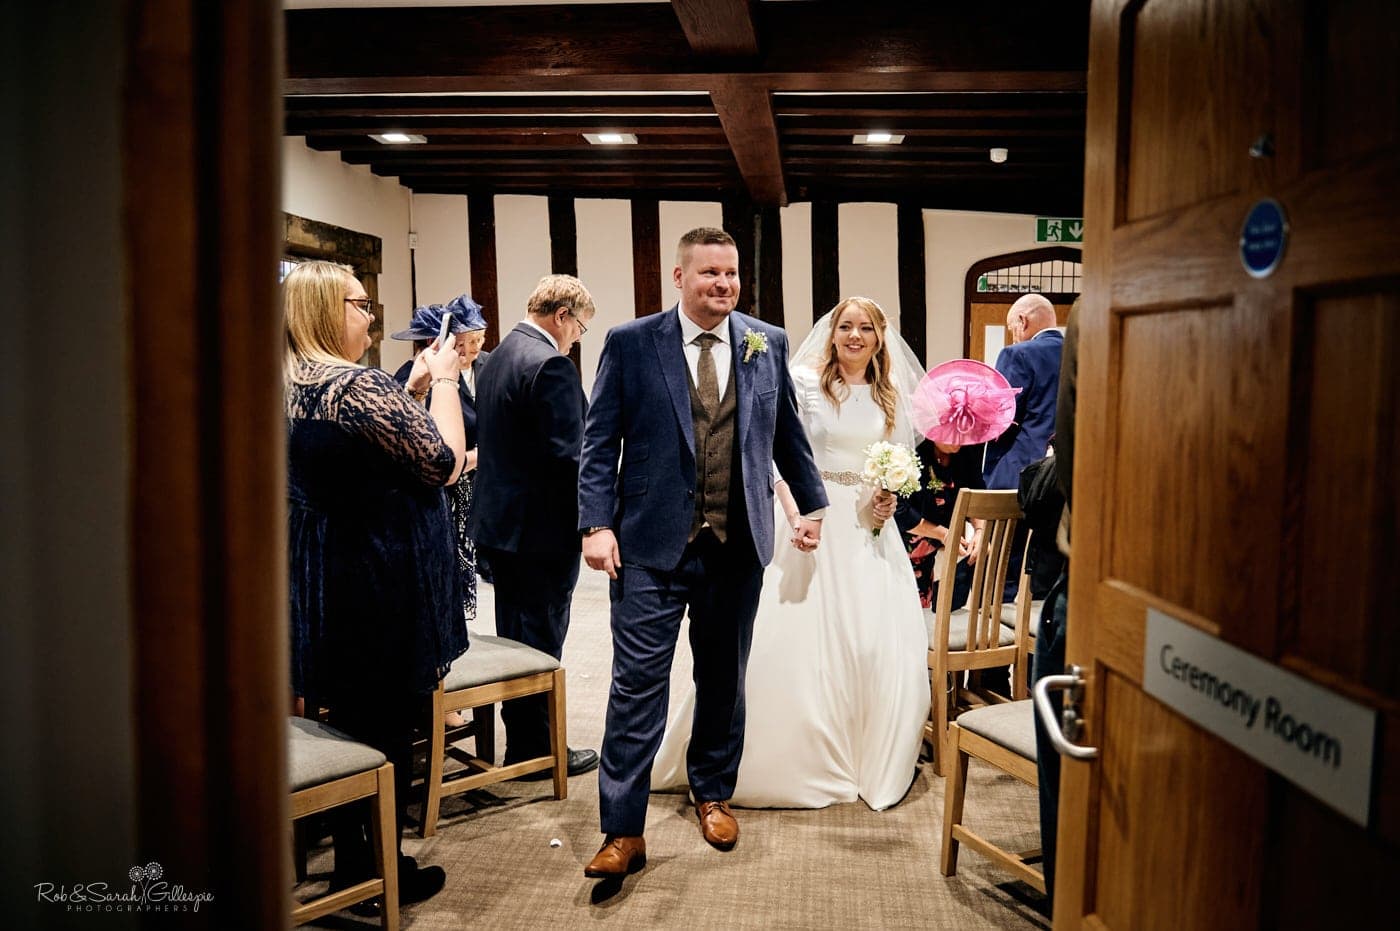 Bride and groom leave wedding ceremony in The Henley Room, Stratford-upon-Avon